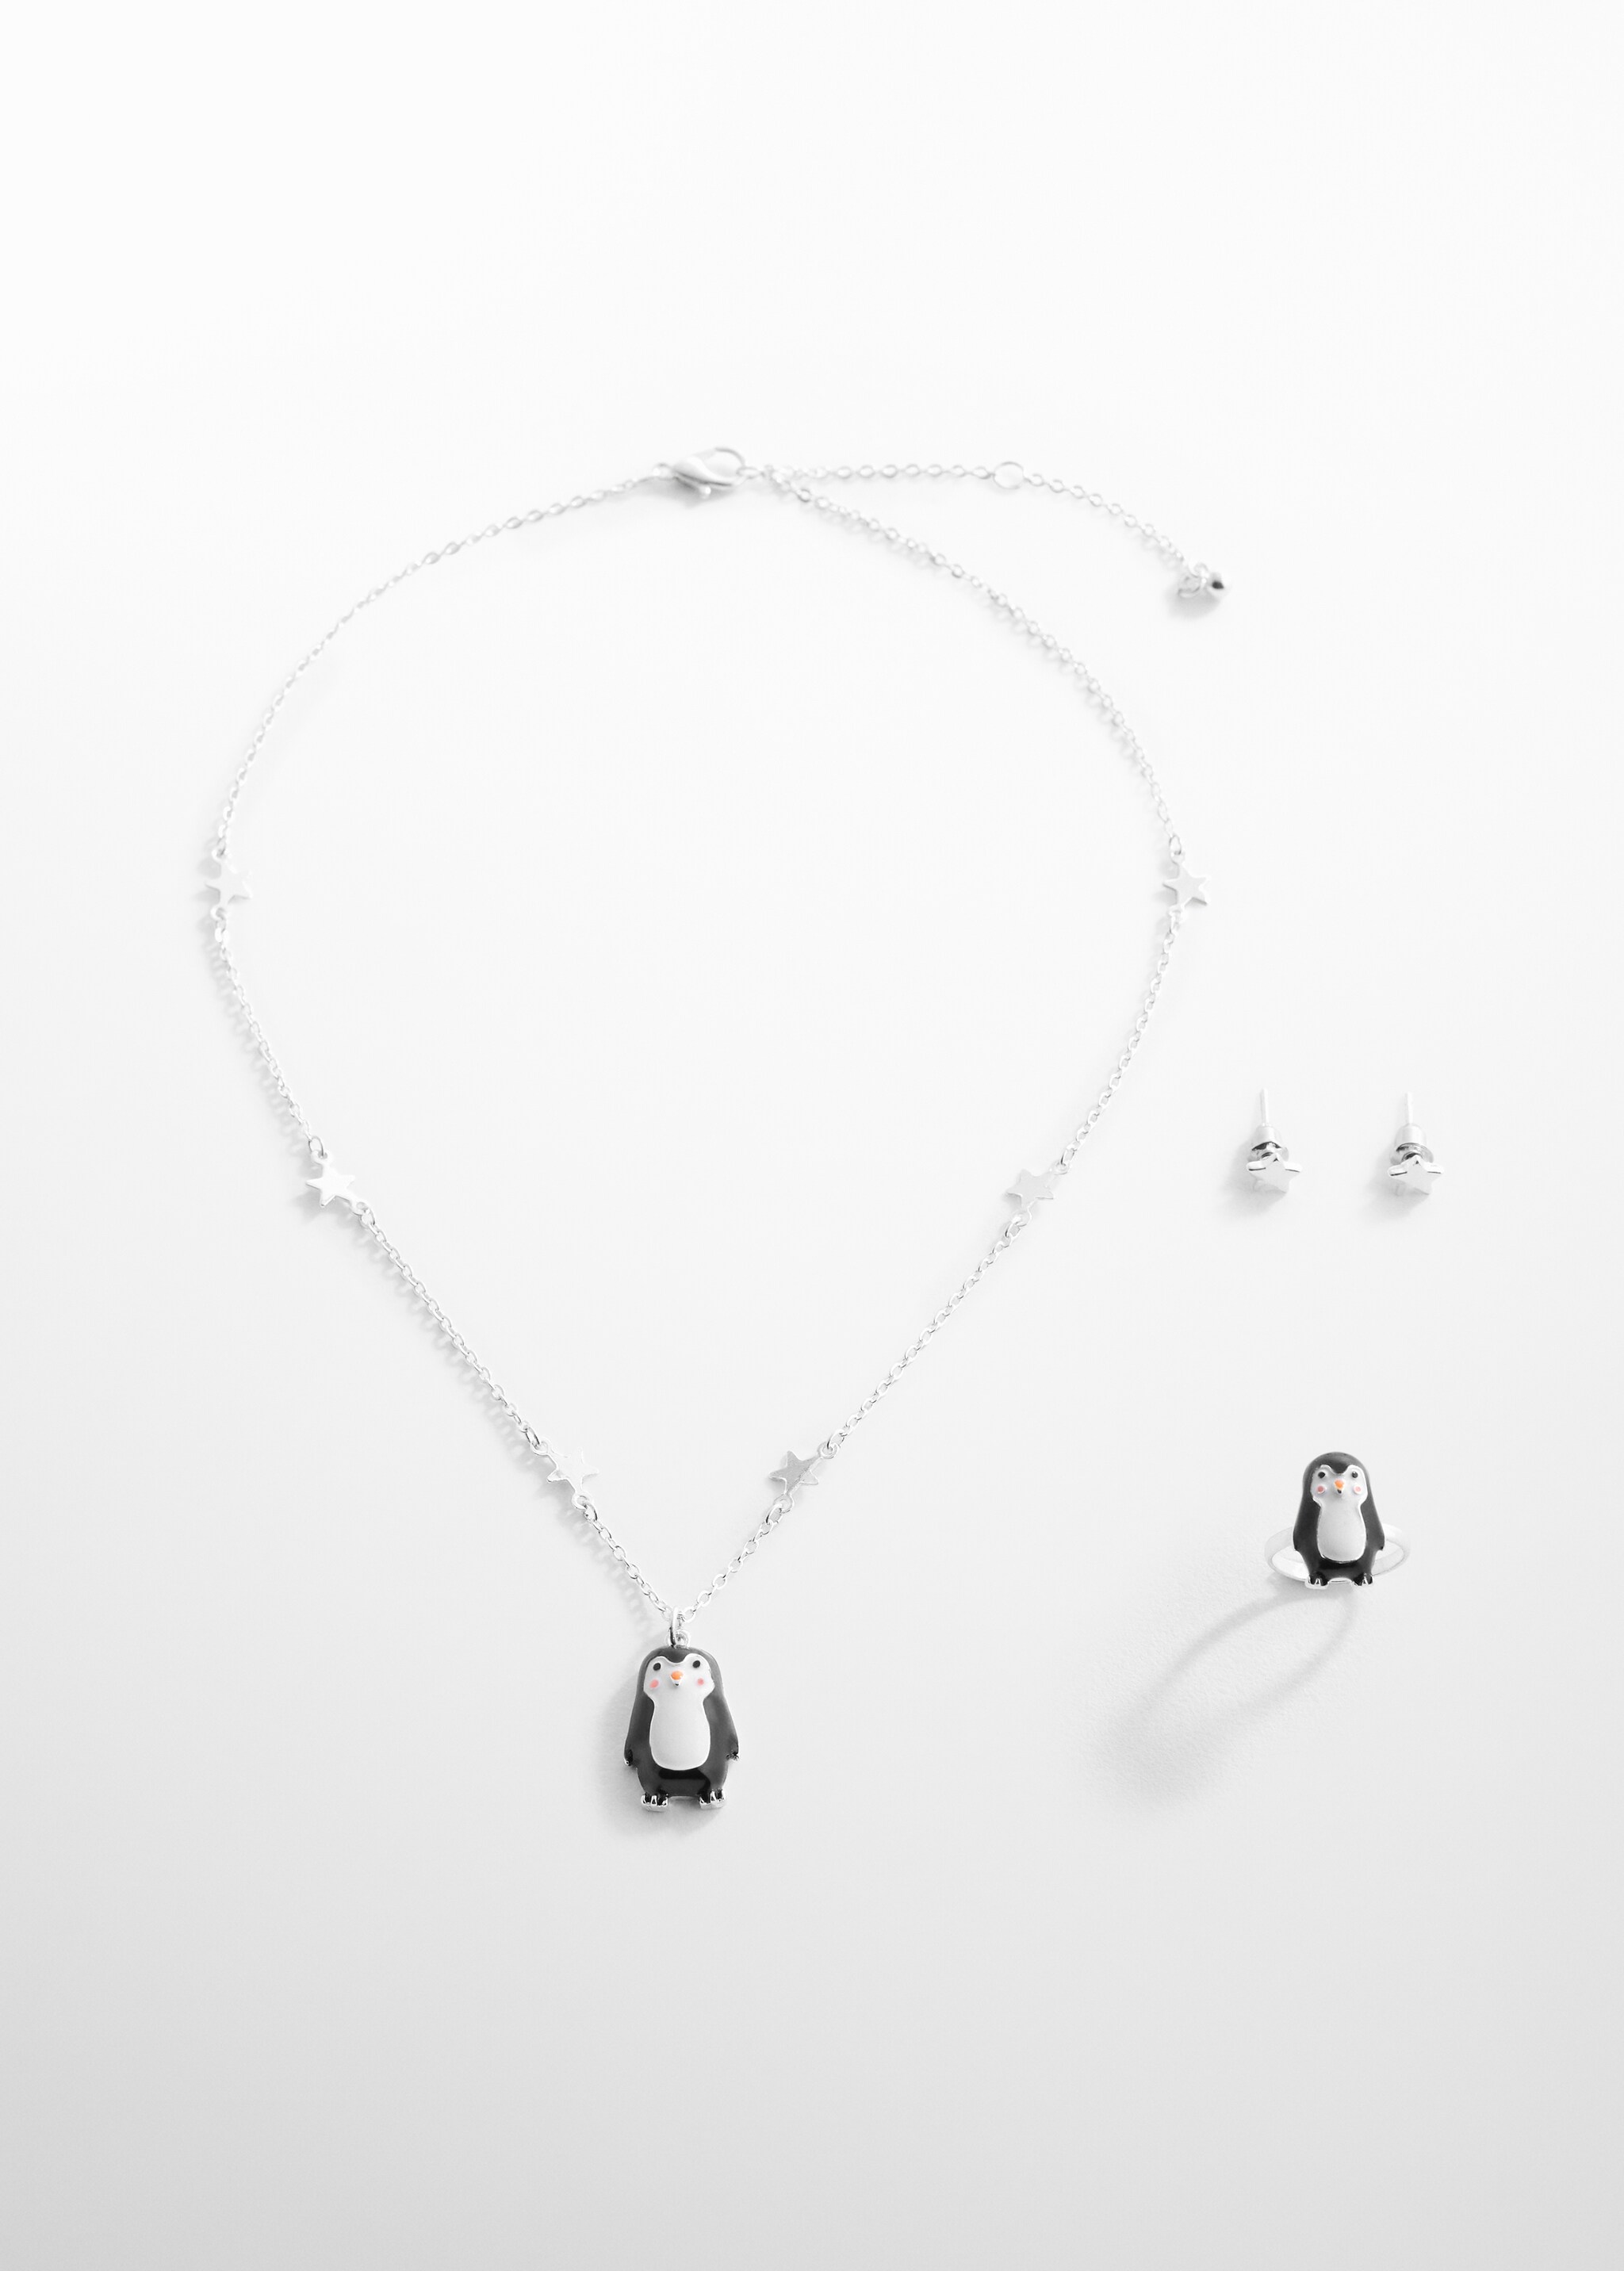 Necklace ring and earrings set - Article without model